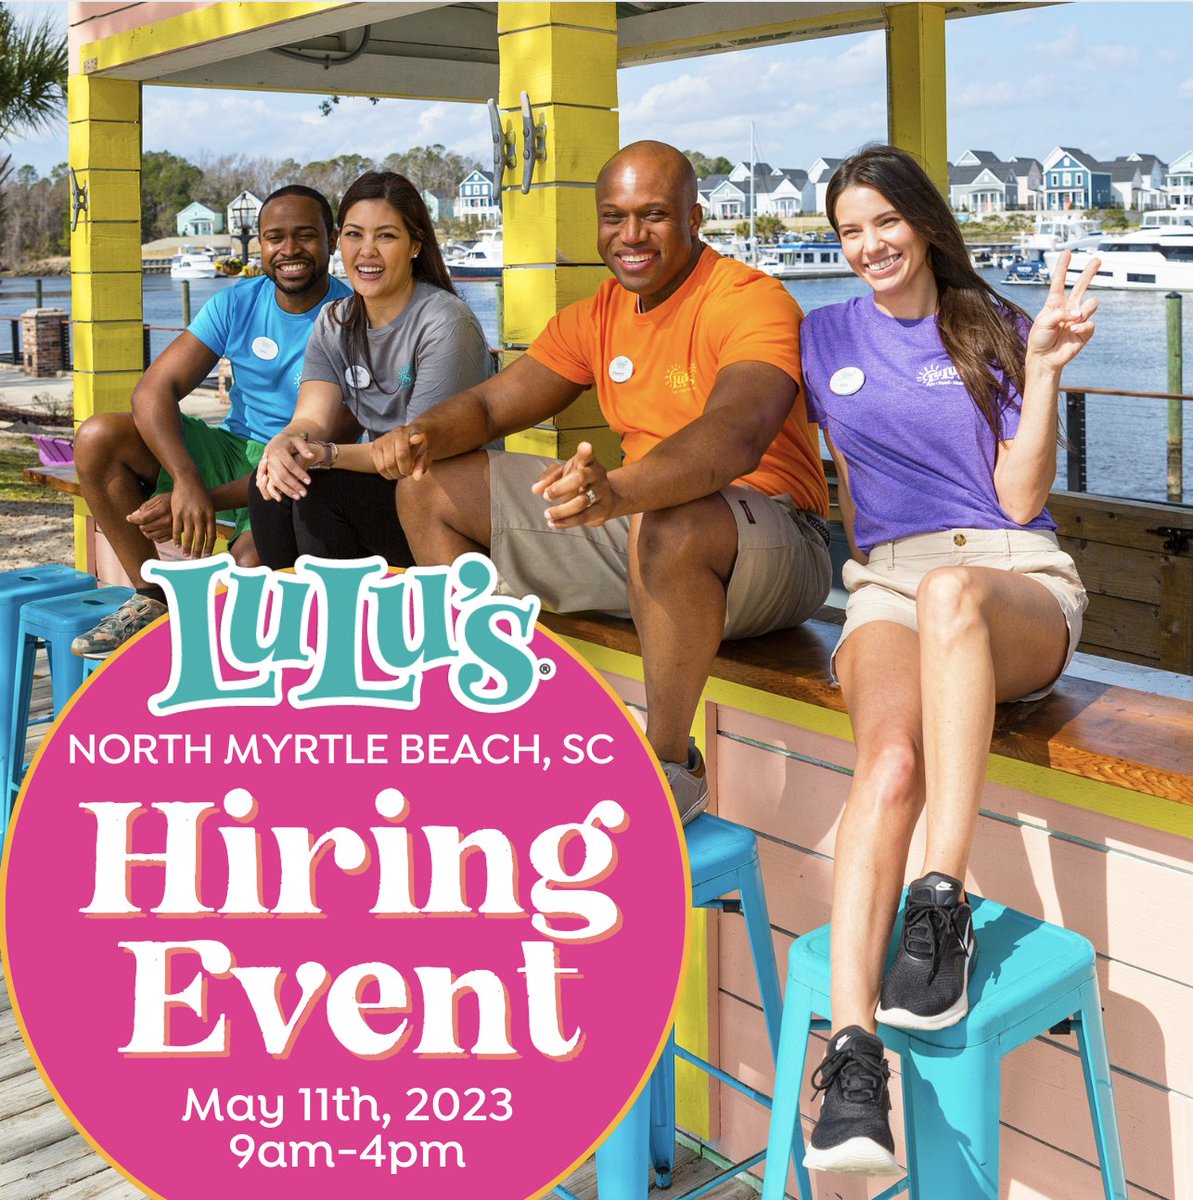 Mark your calendars for May 11th and join us at our Hiring Event! 🌴☀️💚 Register here: bit.ly/3UQSBnV